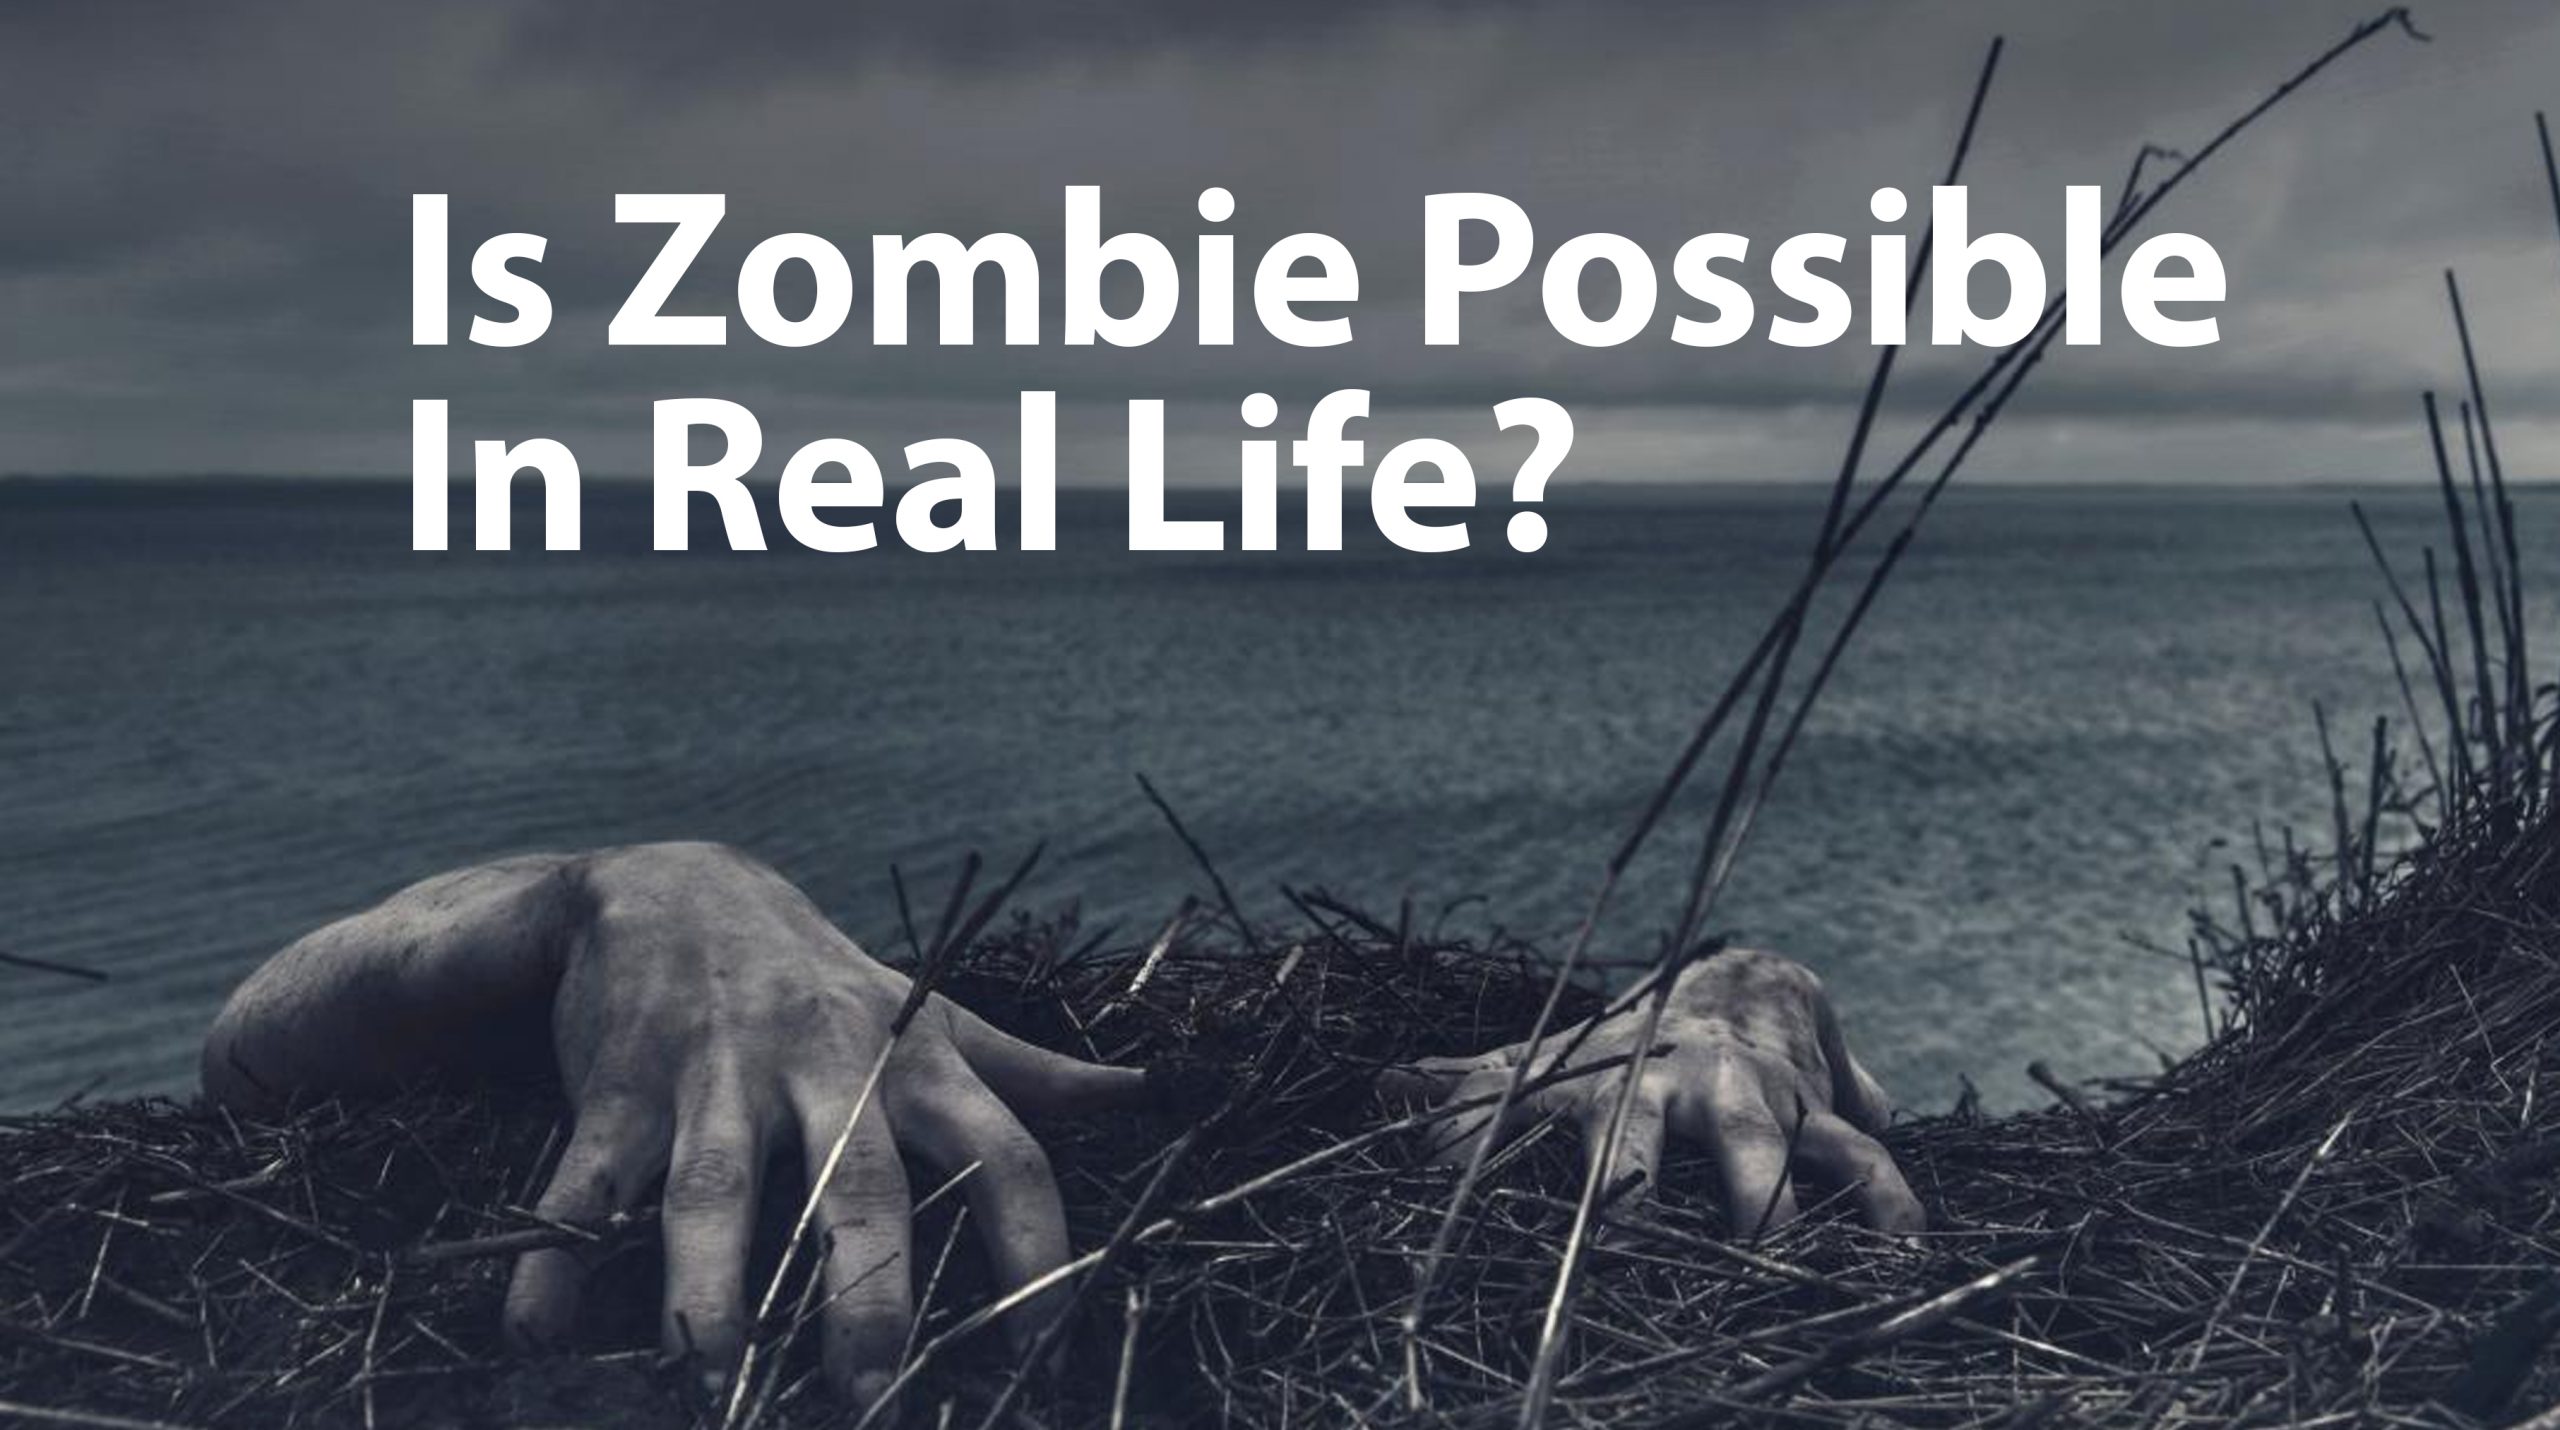 Is Zombie Possible In Real Life? (Based On Zombie Movie)